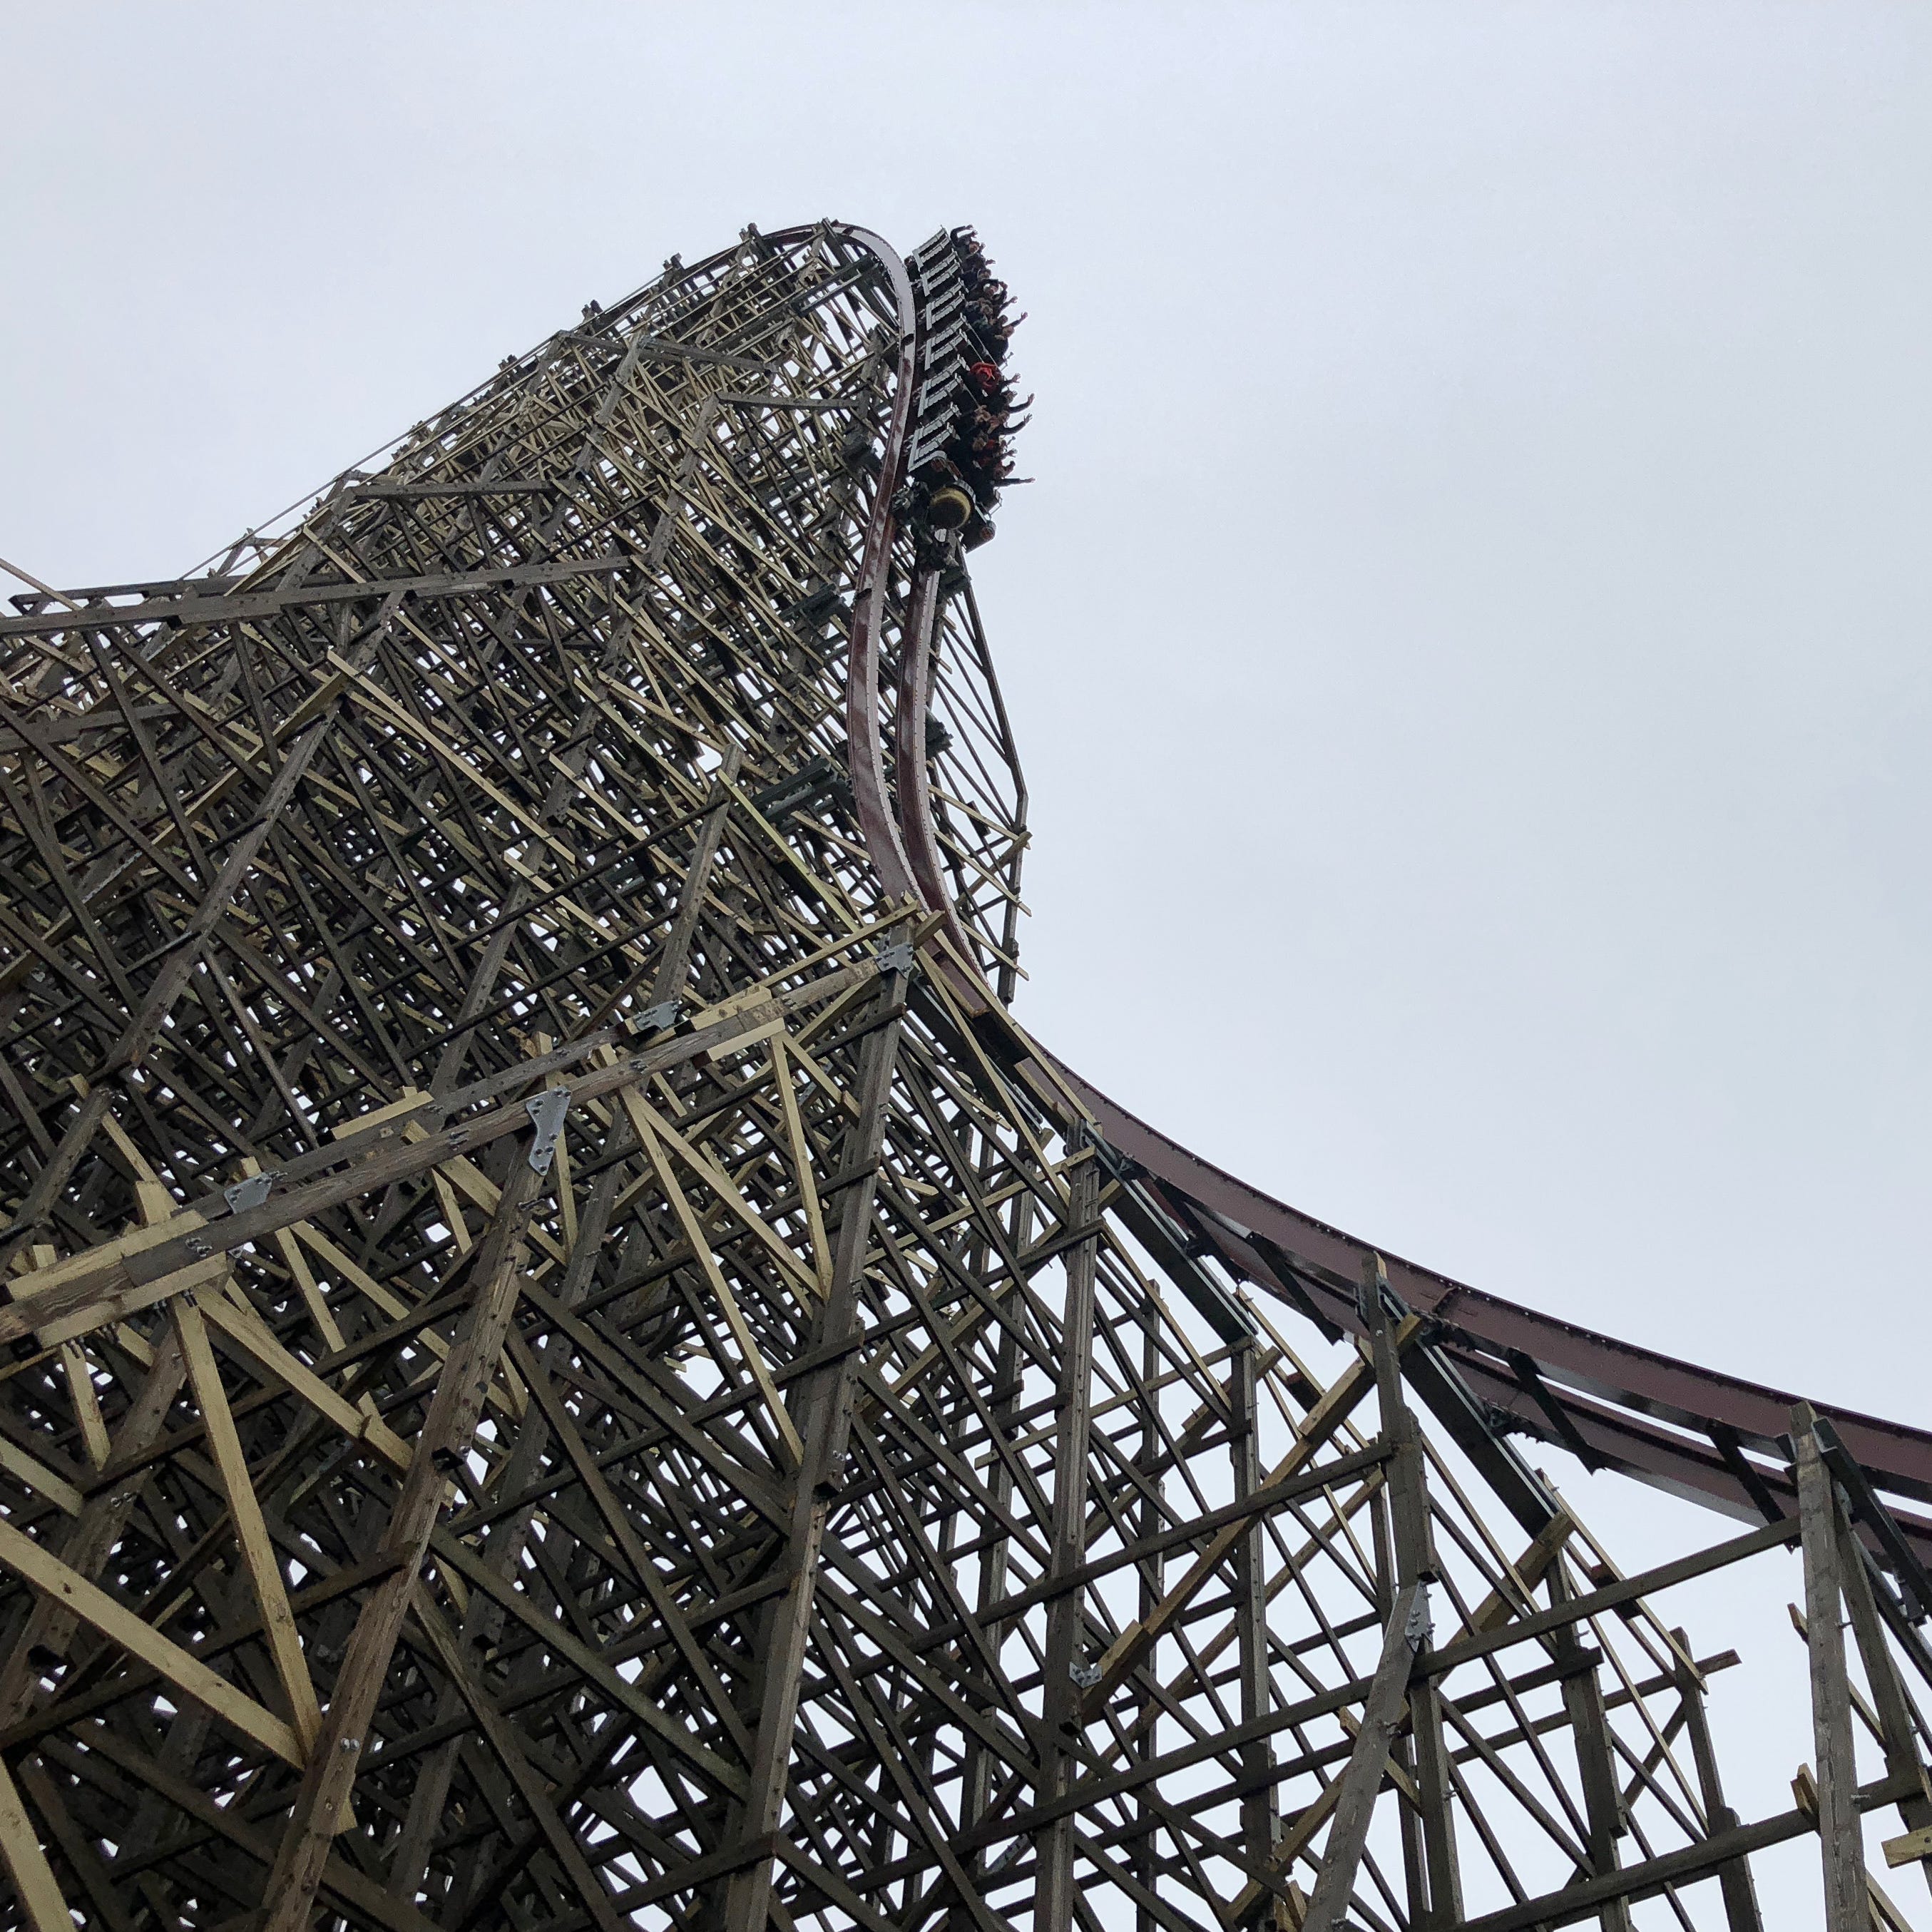 Steel Vengeance at Cedar Point in Sandusky, Ohio isn't a completely new attraction, exactly. Formerly known as Mean Streak, the surgical specialists at the ride company, Rocky Mountain Construction (RMC), performed a track replacement by yanking out 